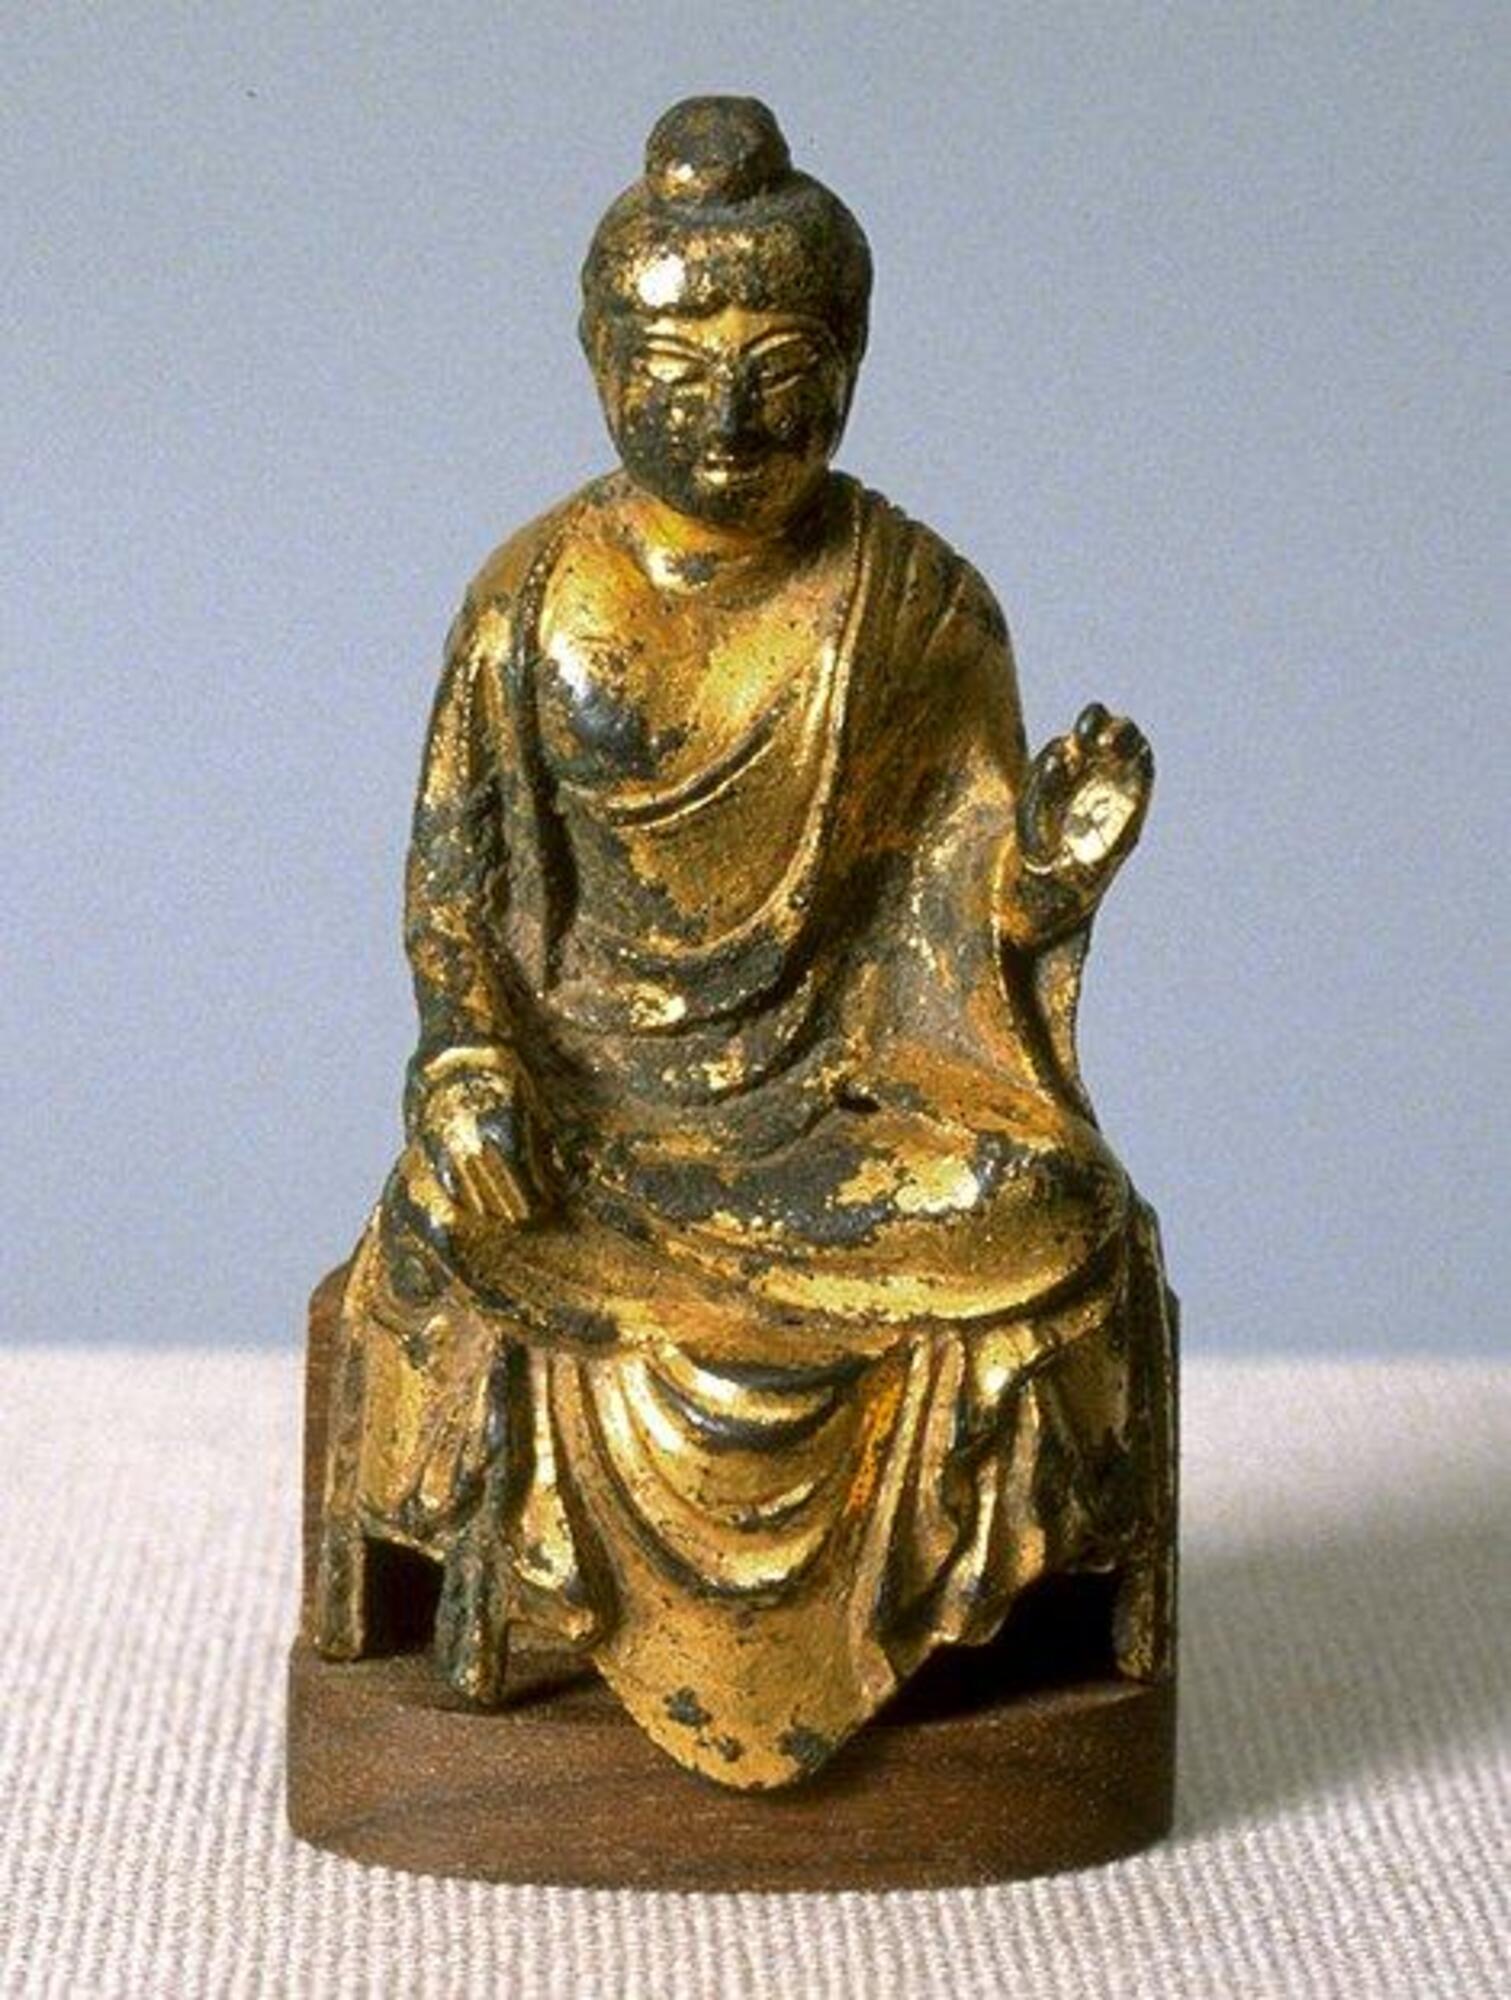 Small gilt bronze seated Buddha in style of China’s cosmopolitan Tang Dynasty. It has a full figure, artfully draped robes, and a plump, rounded face with arched eyebrows.   Hand is raised in abhaya mudra.